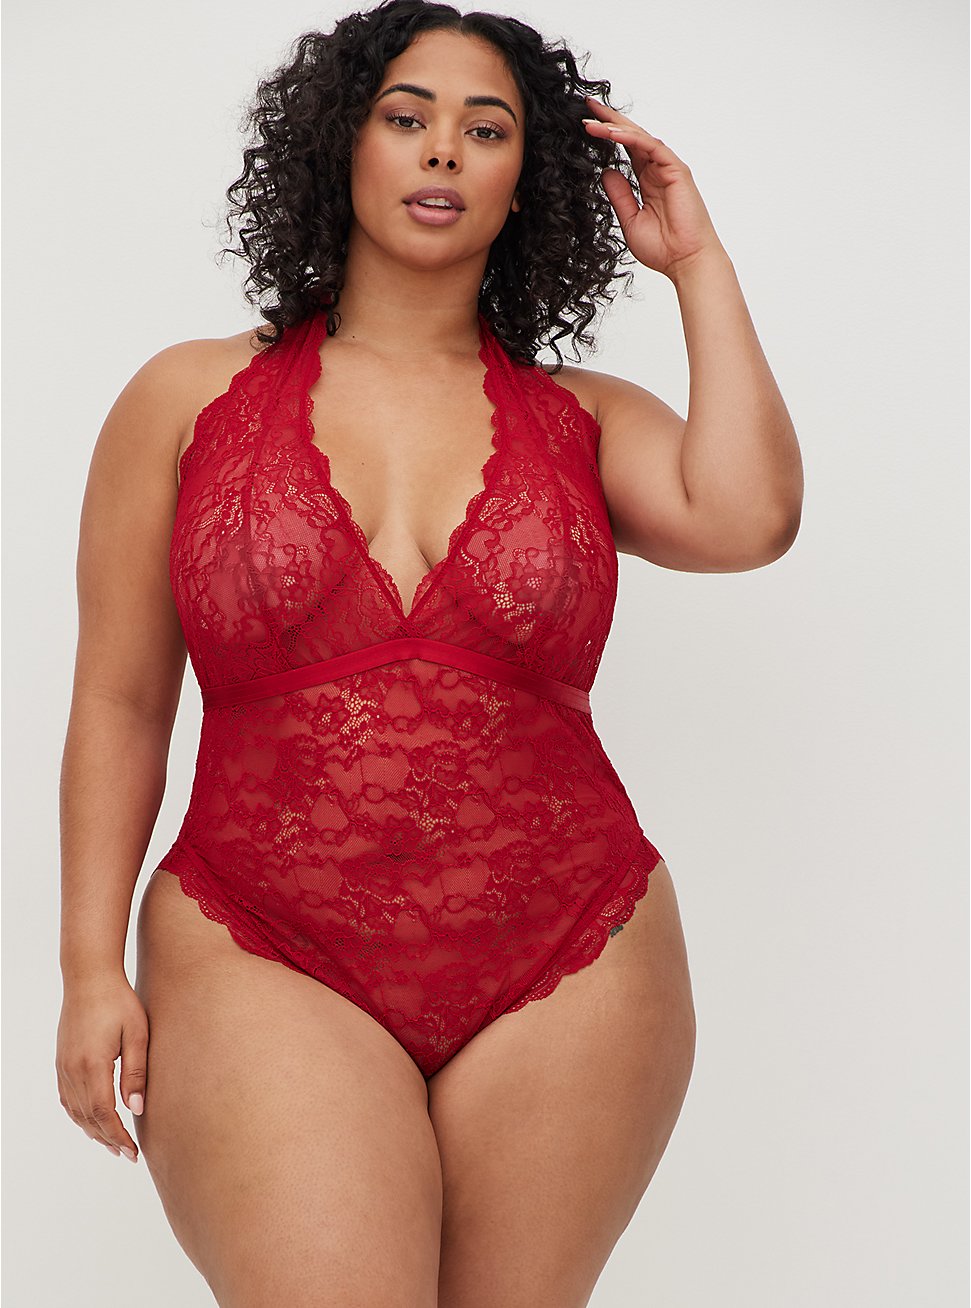 Bodysuit - Lace Halter Bow Red, JESTER RED, hi-res